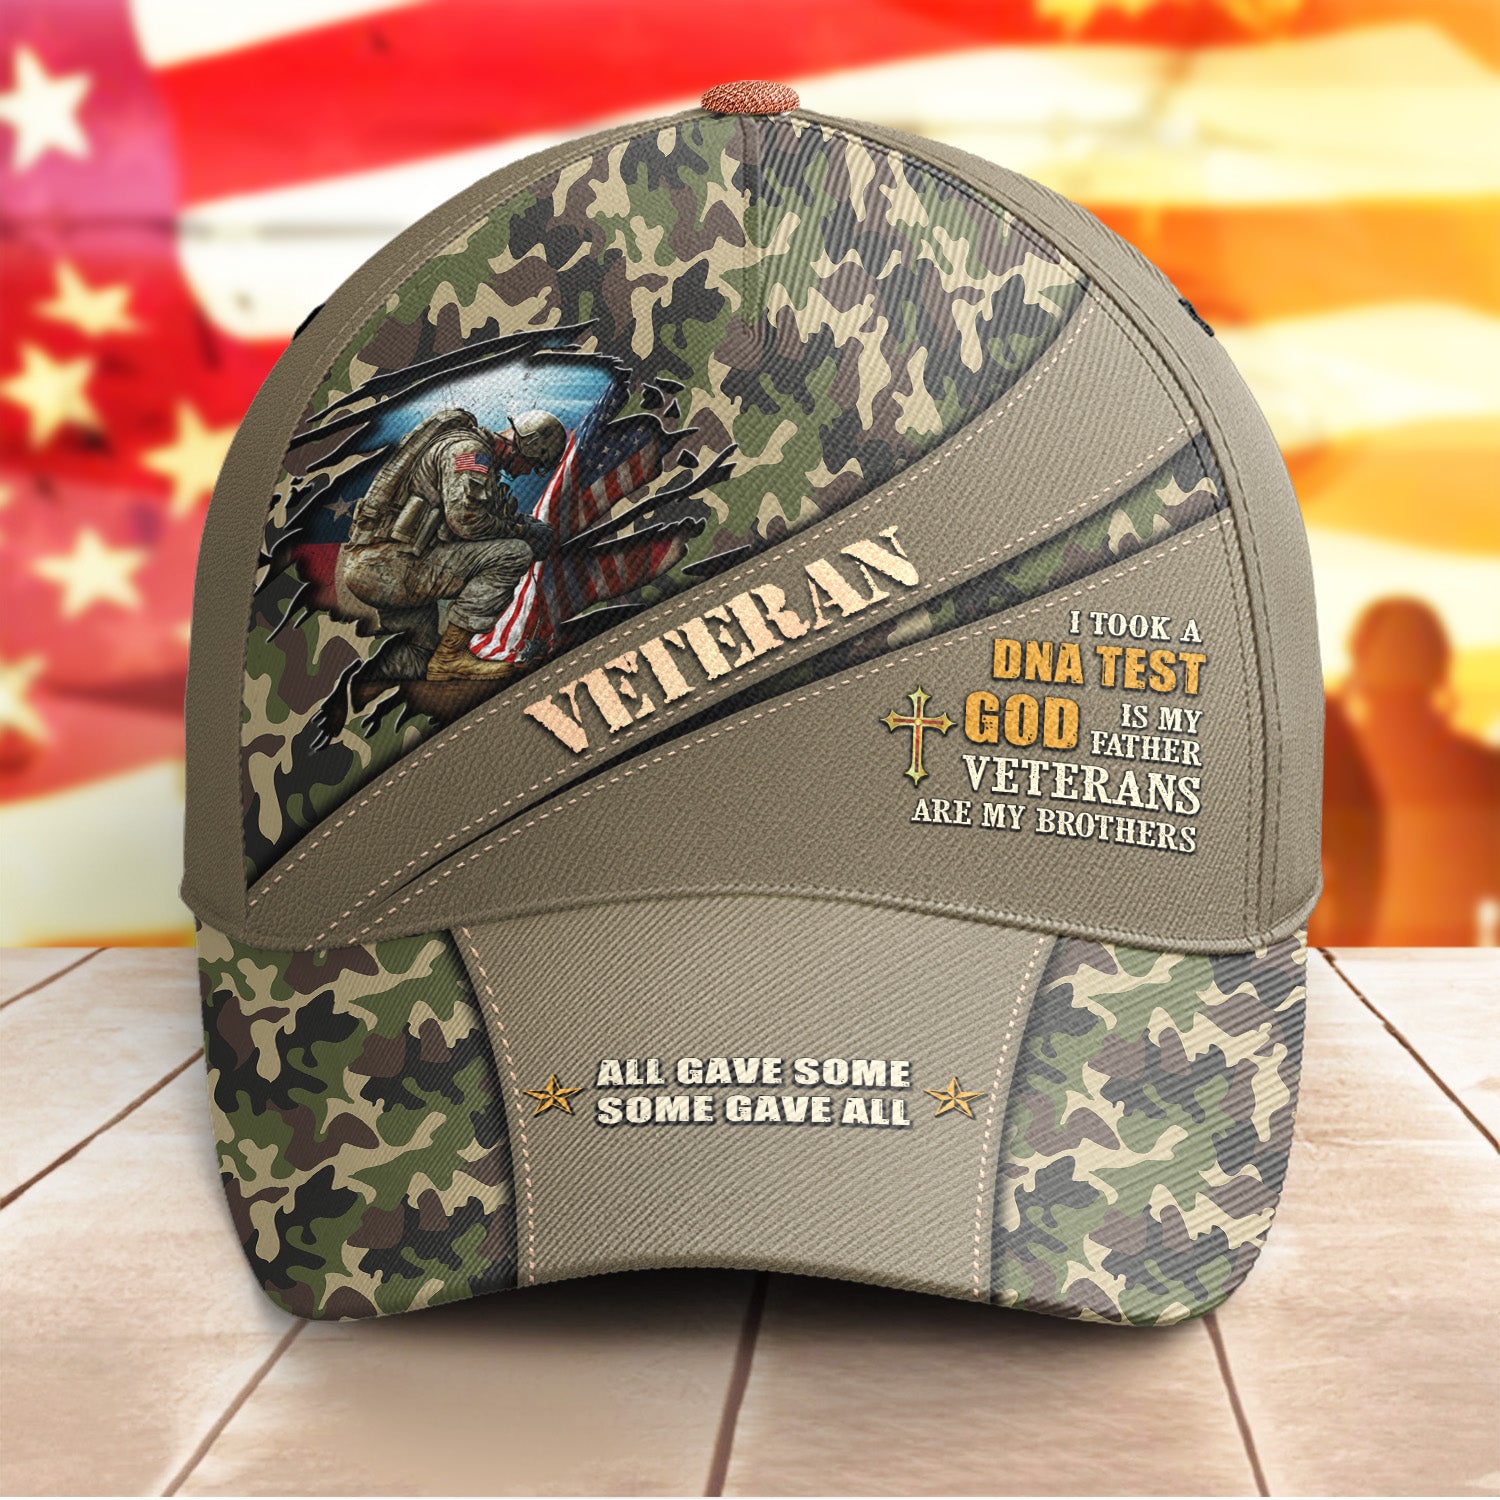 Space Force Veterans Cap Some Gave All US Space Force Hat Religious Veteran Gifts